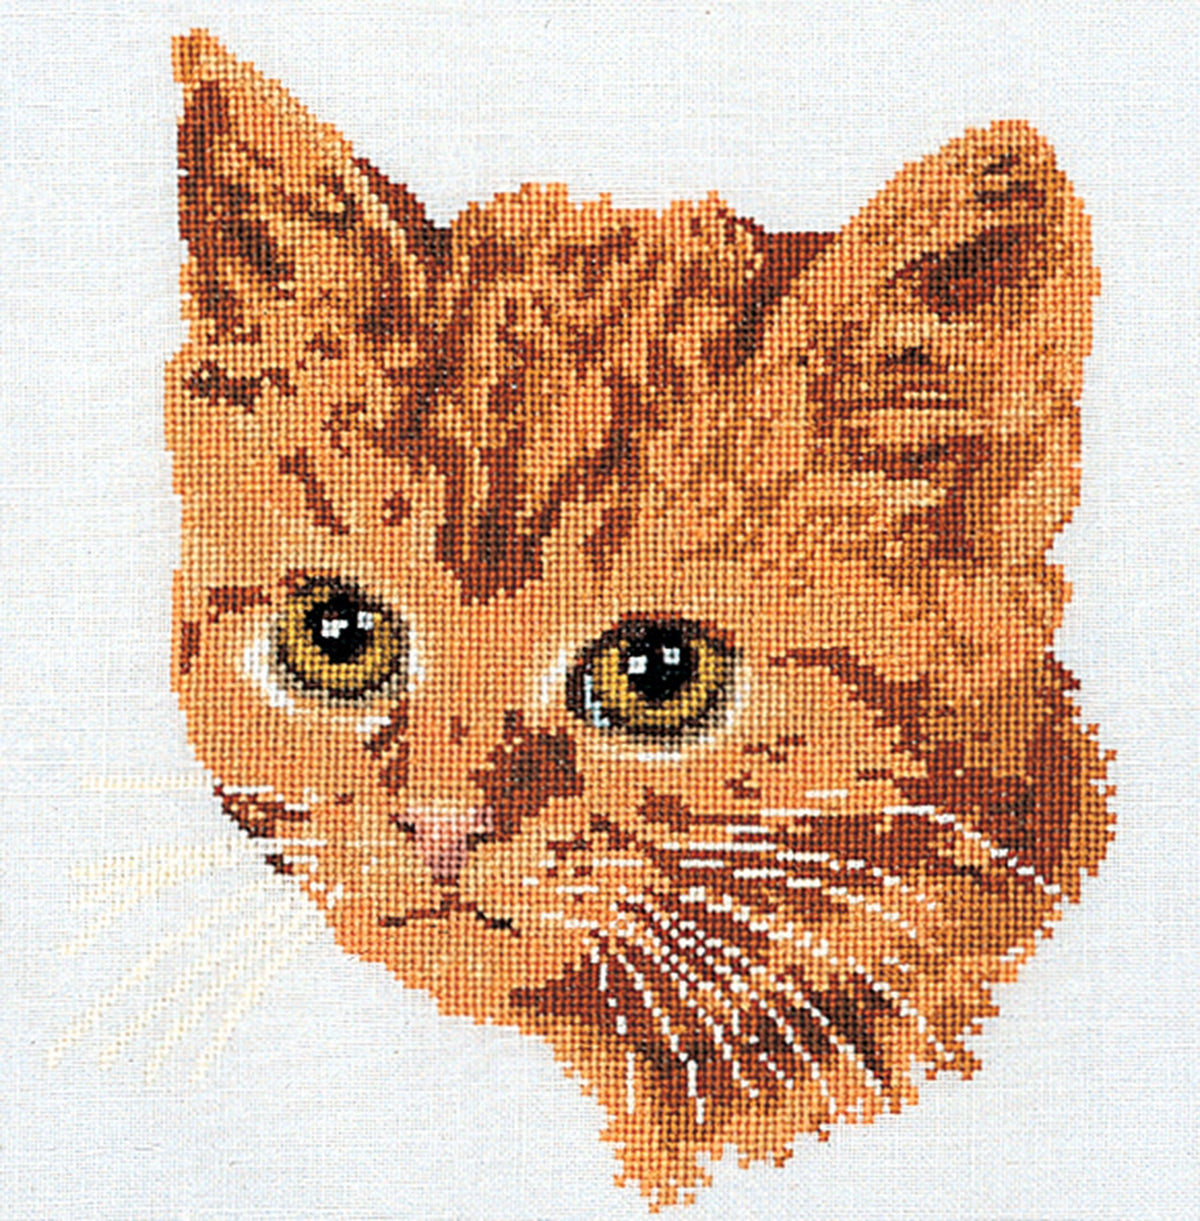 Thea Gouverneur - Counted Cross Stitch Kit - Red Cat - Linen - 24 count - 931 - Thea Gouverneur Since 1959